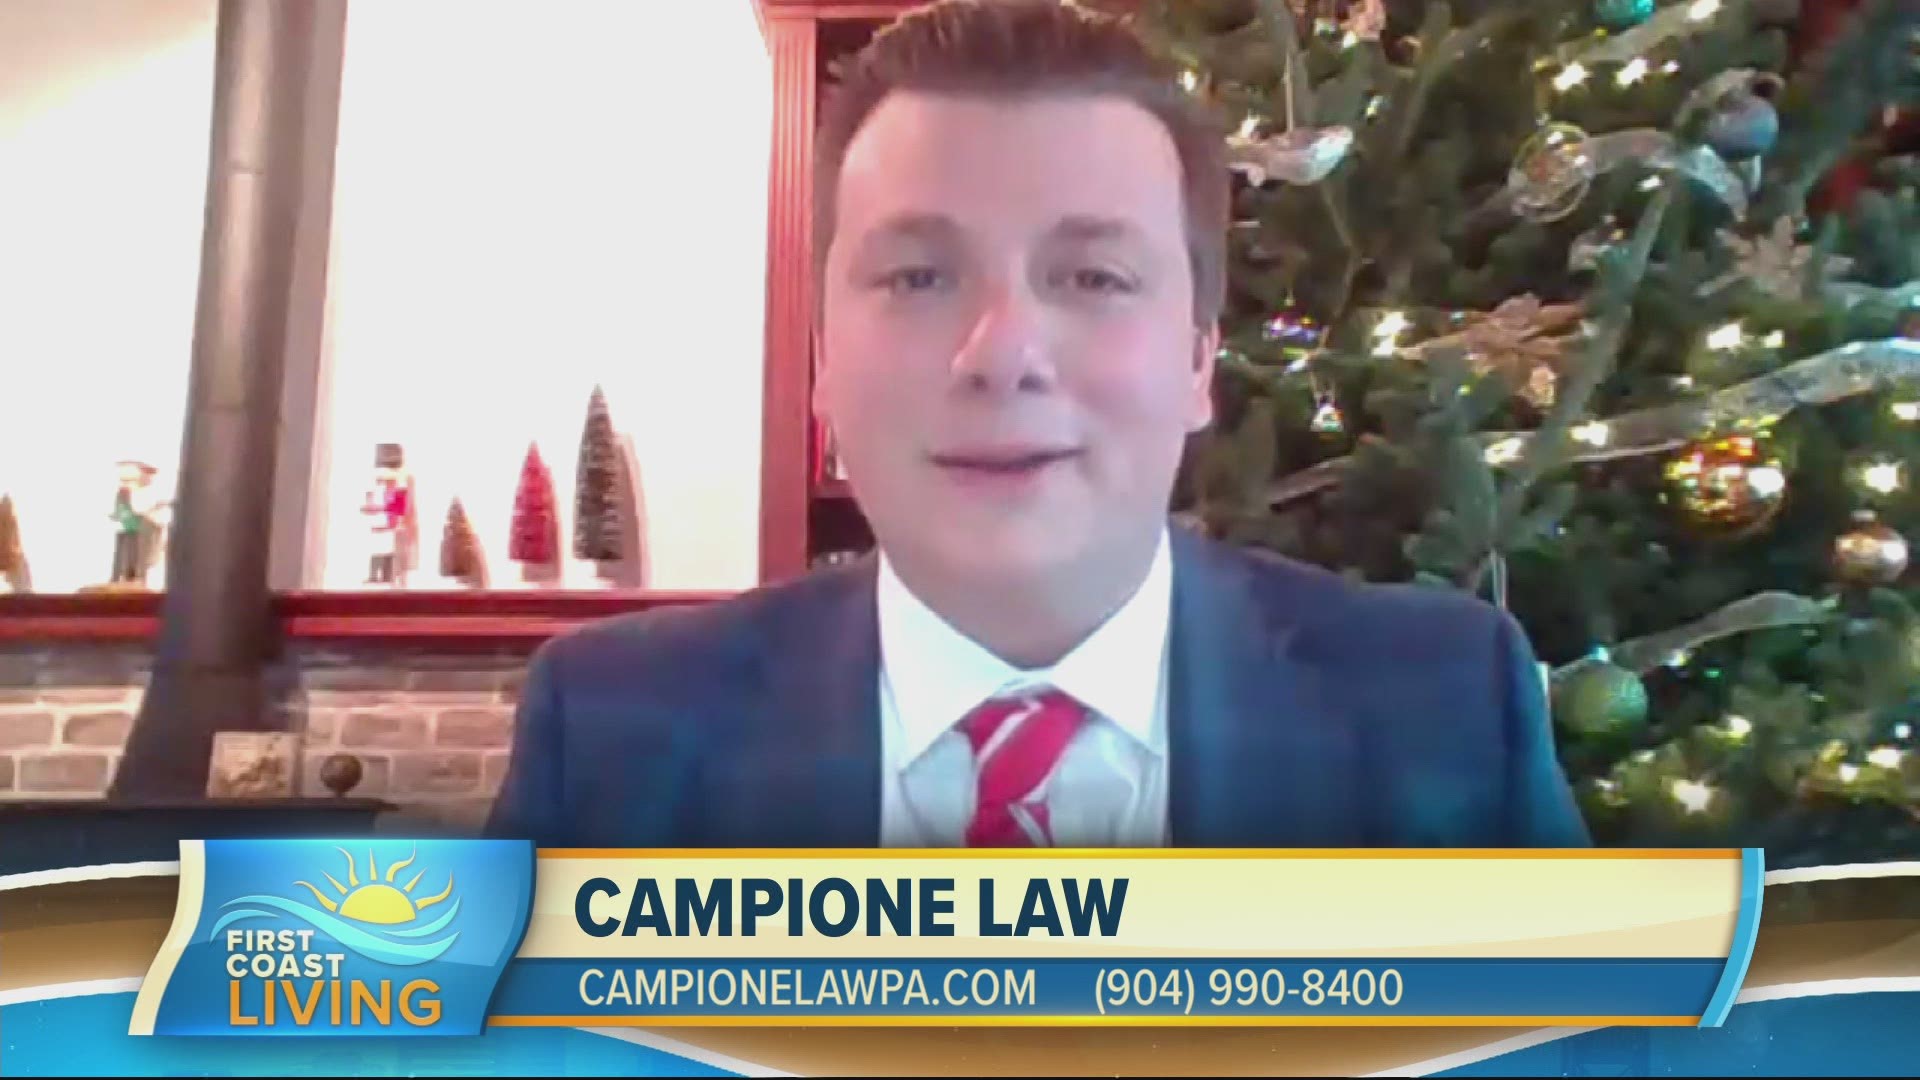 Campione Law is one of the fastest growing firms in Jacksonville